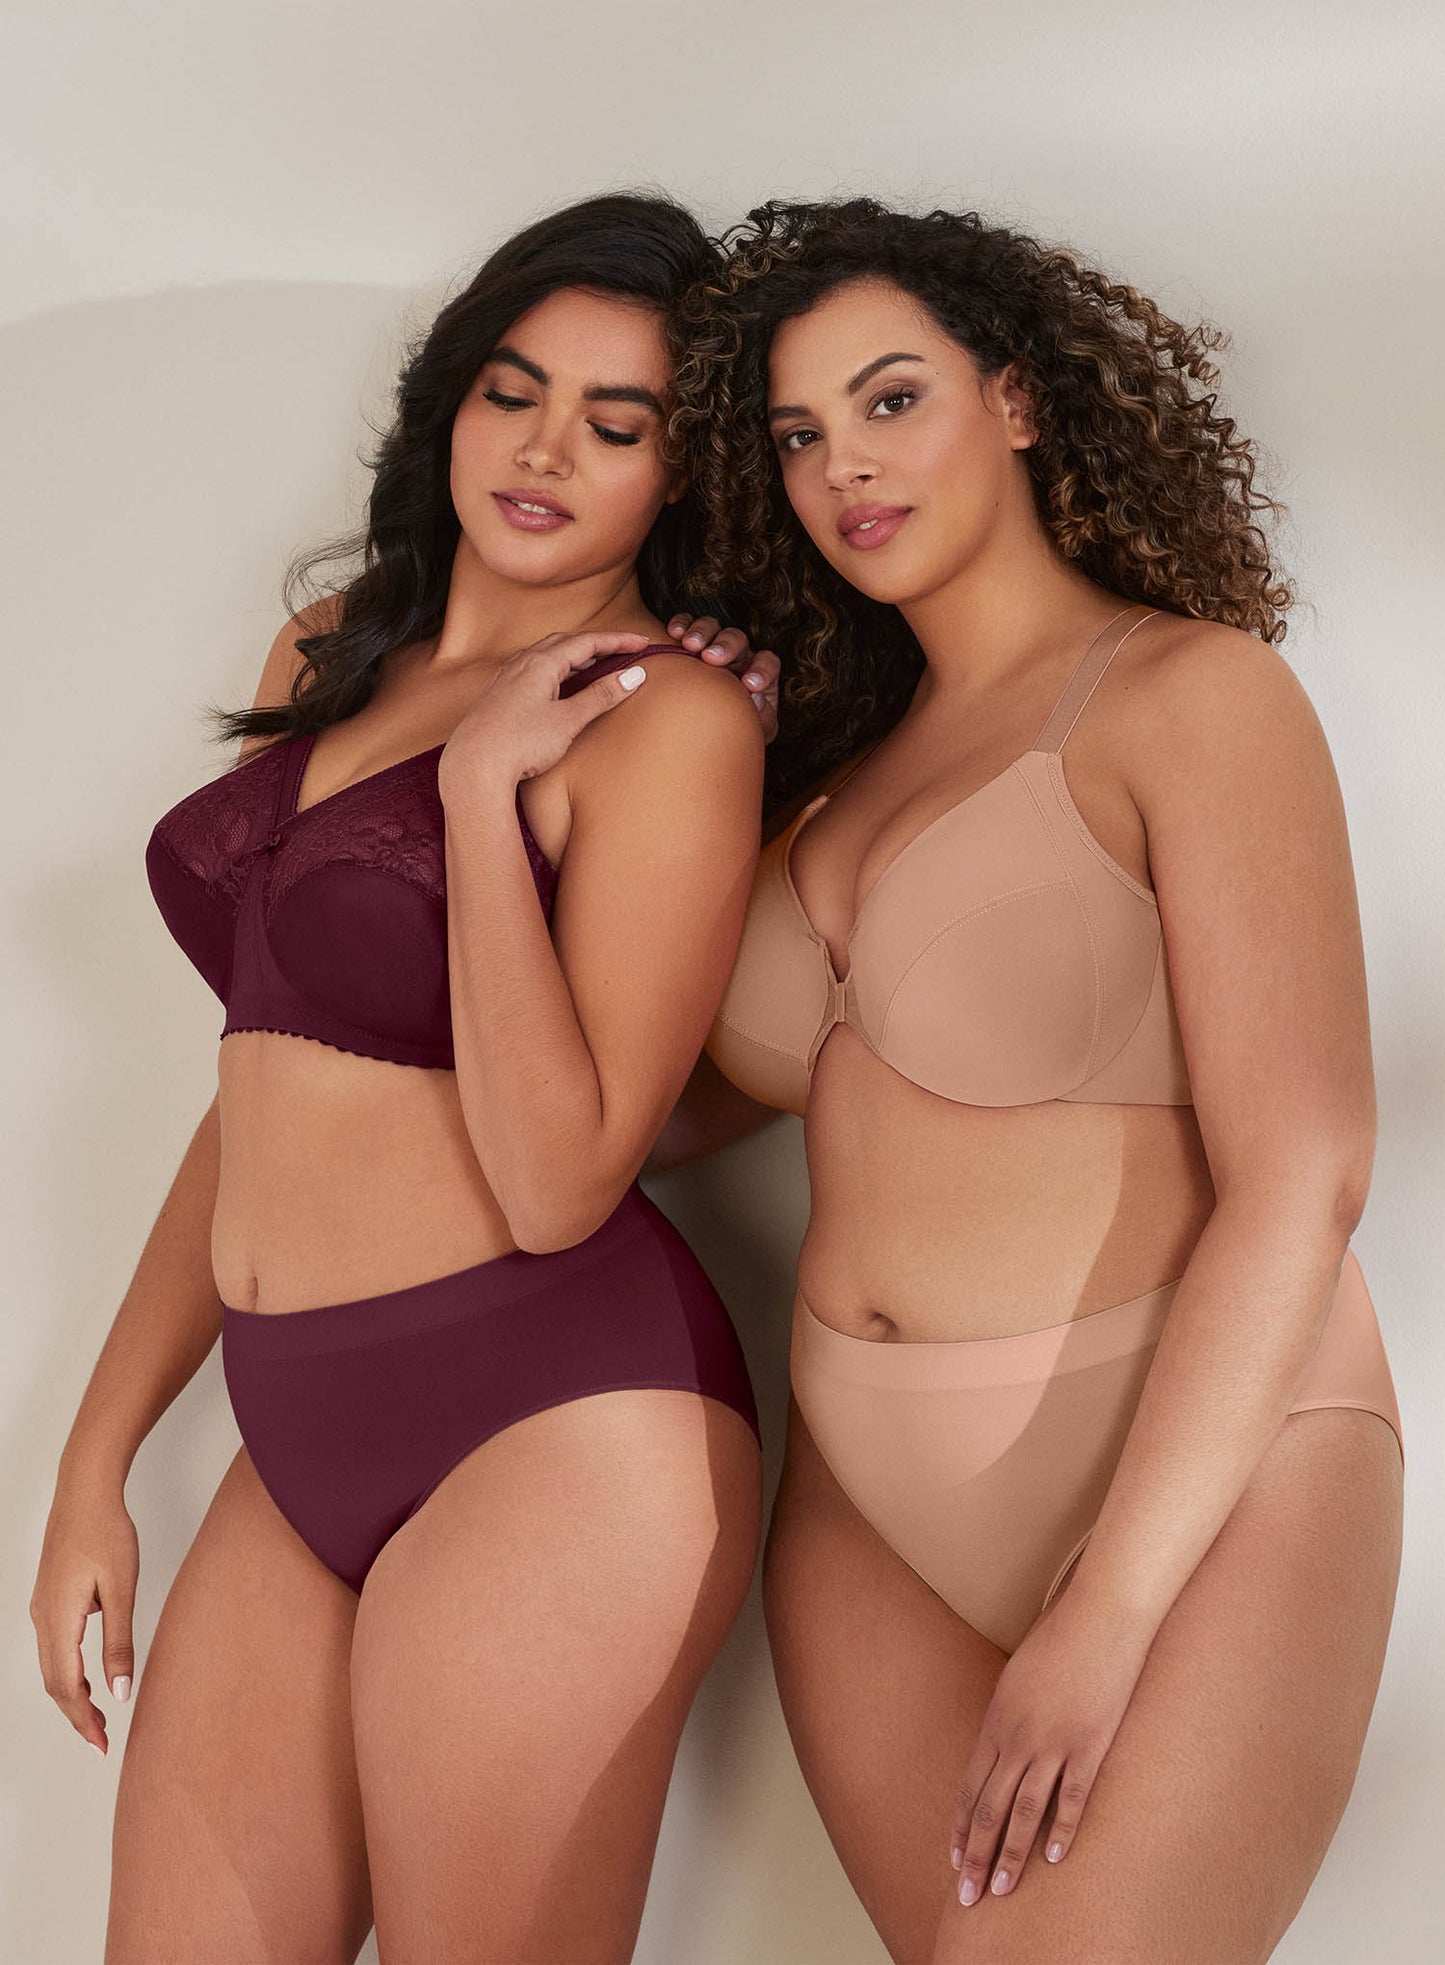 Glamorise: Wonderwire Front Close Smoothing Bra Cappuccino